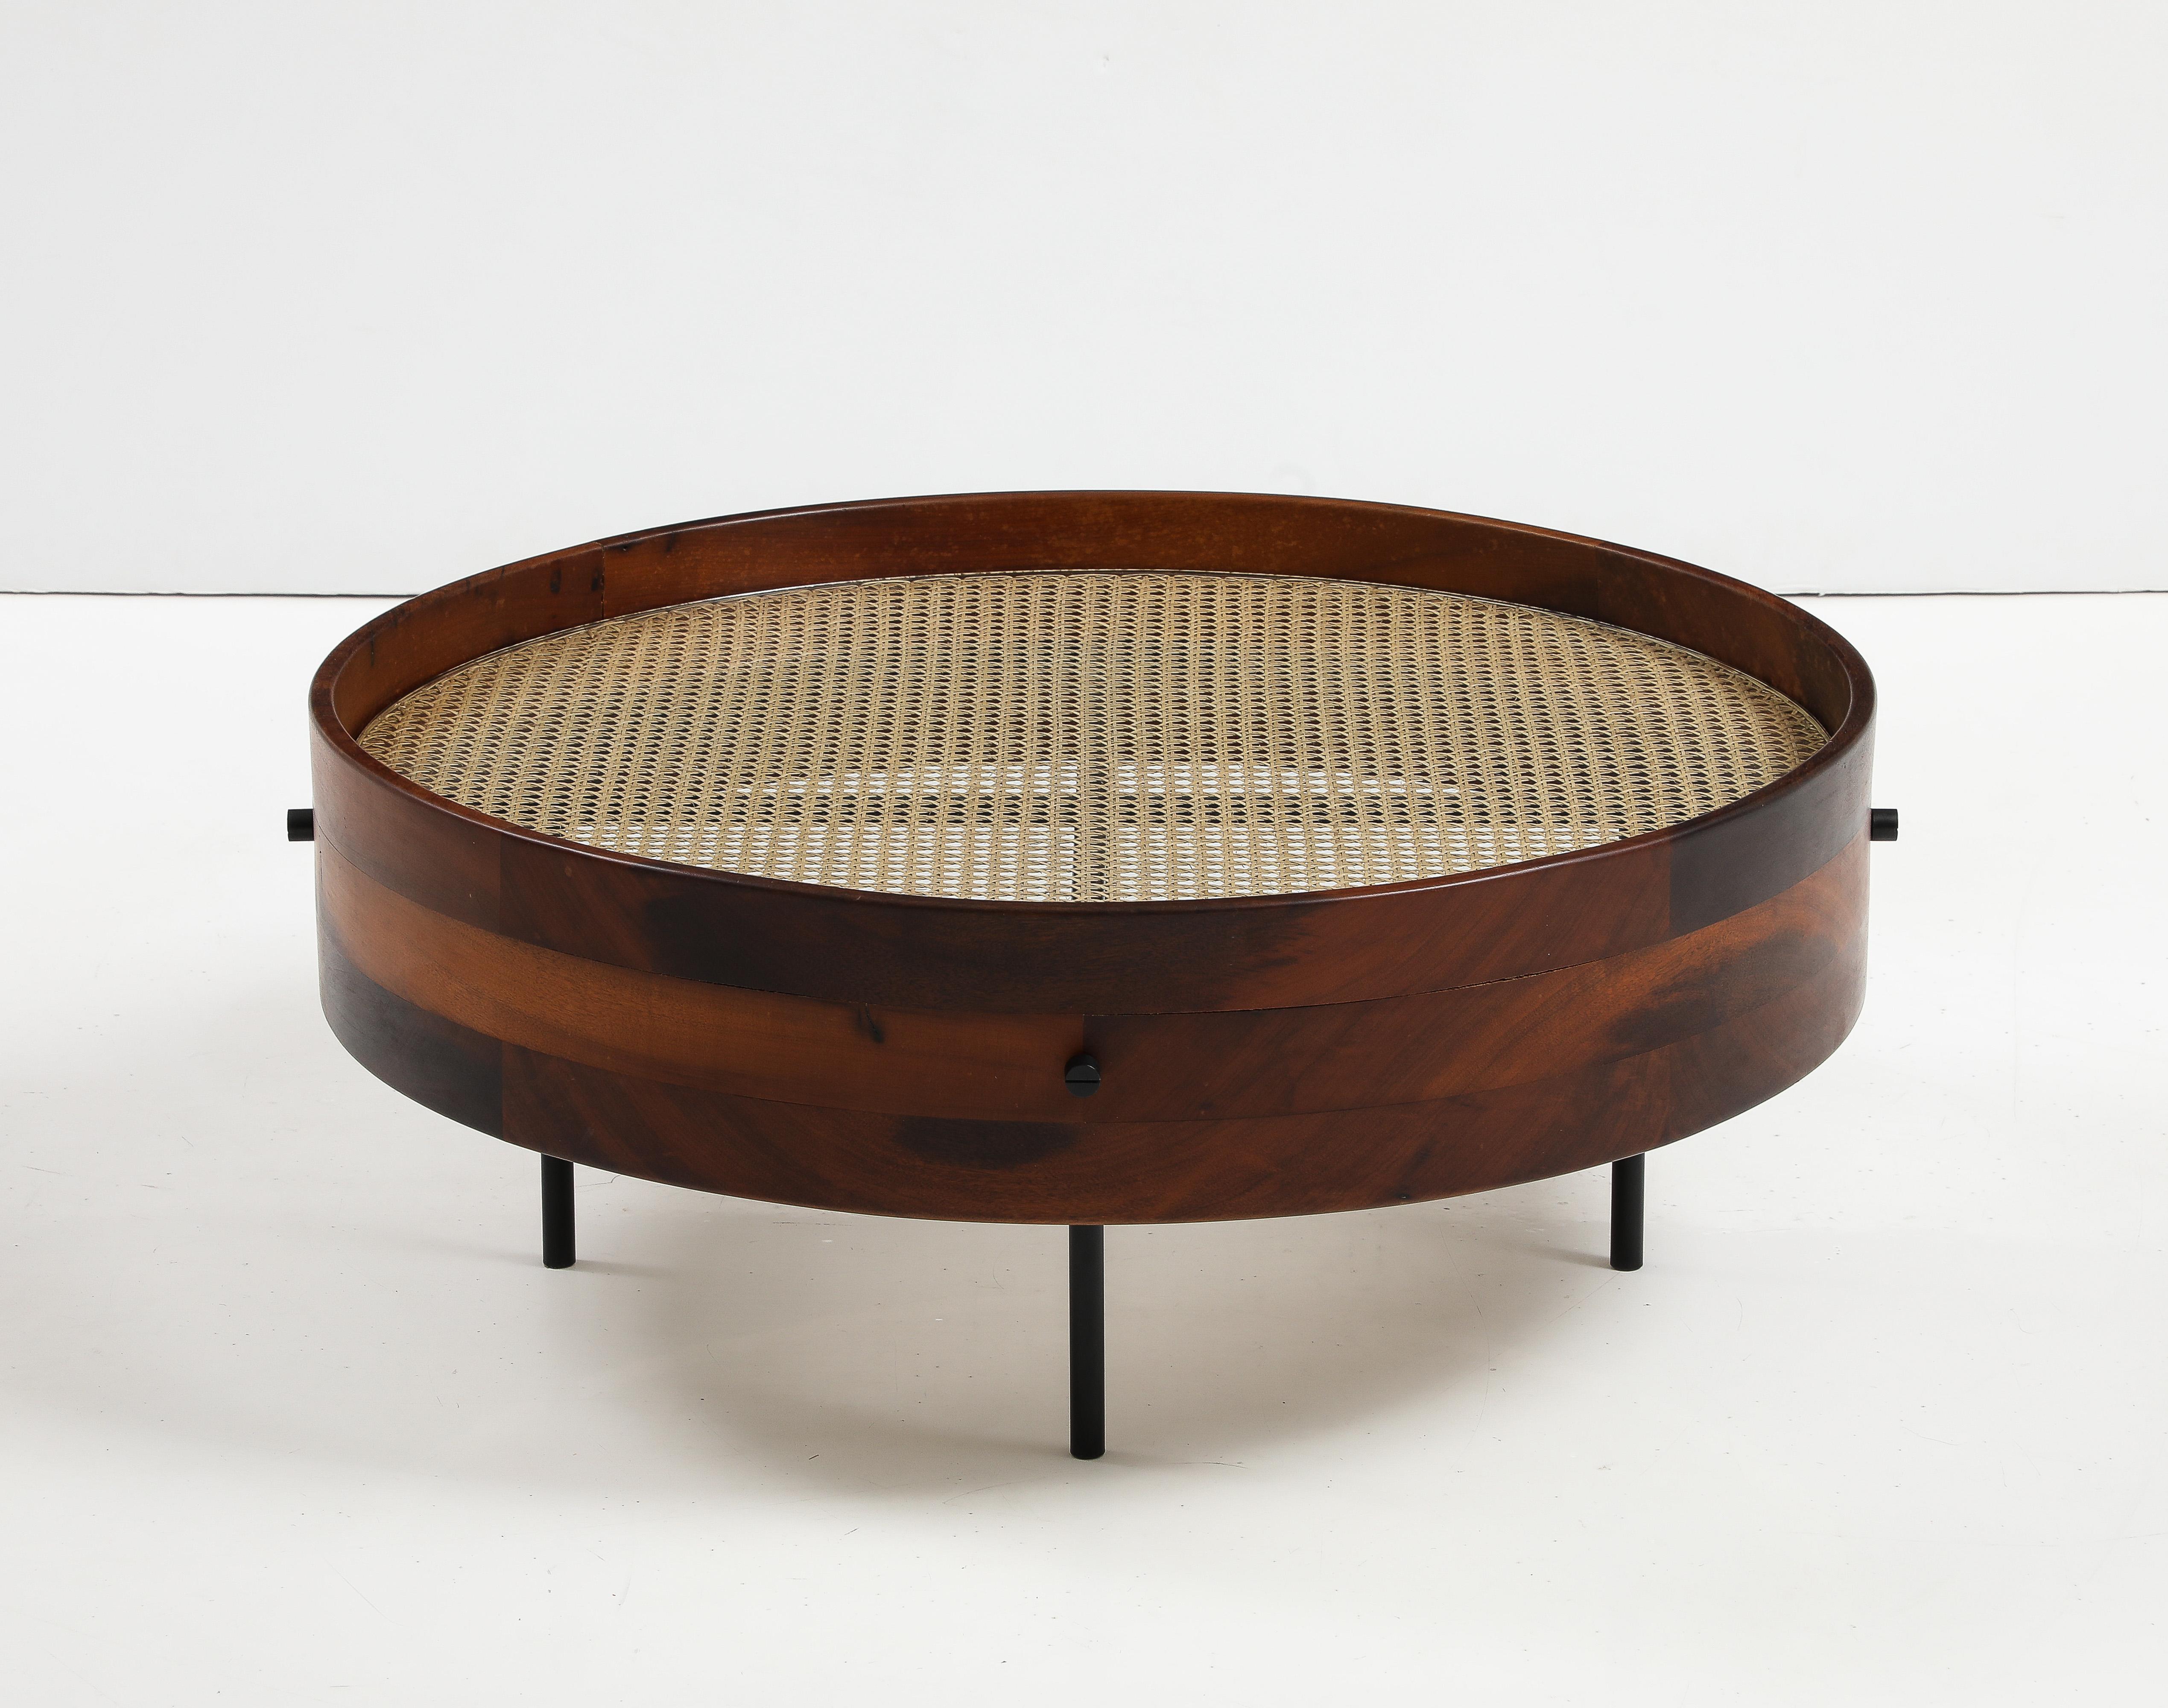 Contemporary “Bernardo” center table by Gustavo Bittencourt, Brazil, 2021.

Contemporary “Bernardo” center table made of solid wood, with straw and glass top. With four iron feet, this table was varnished keeping the characteristics of the wood.